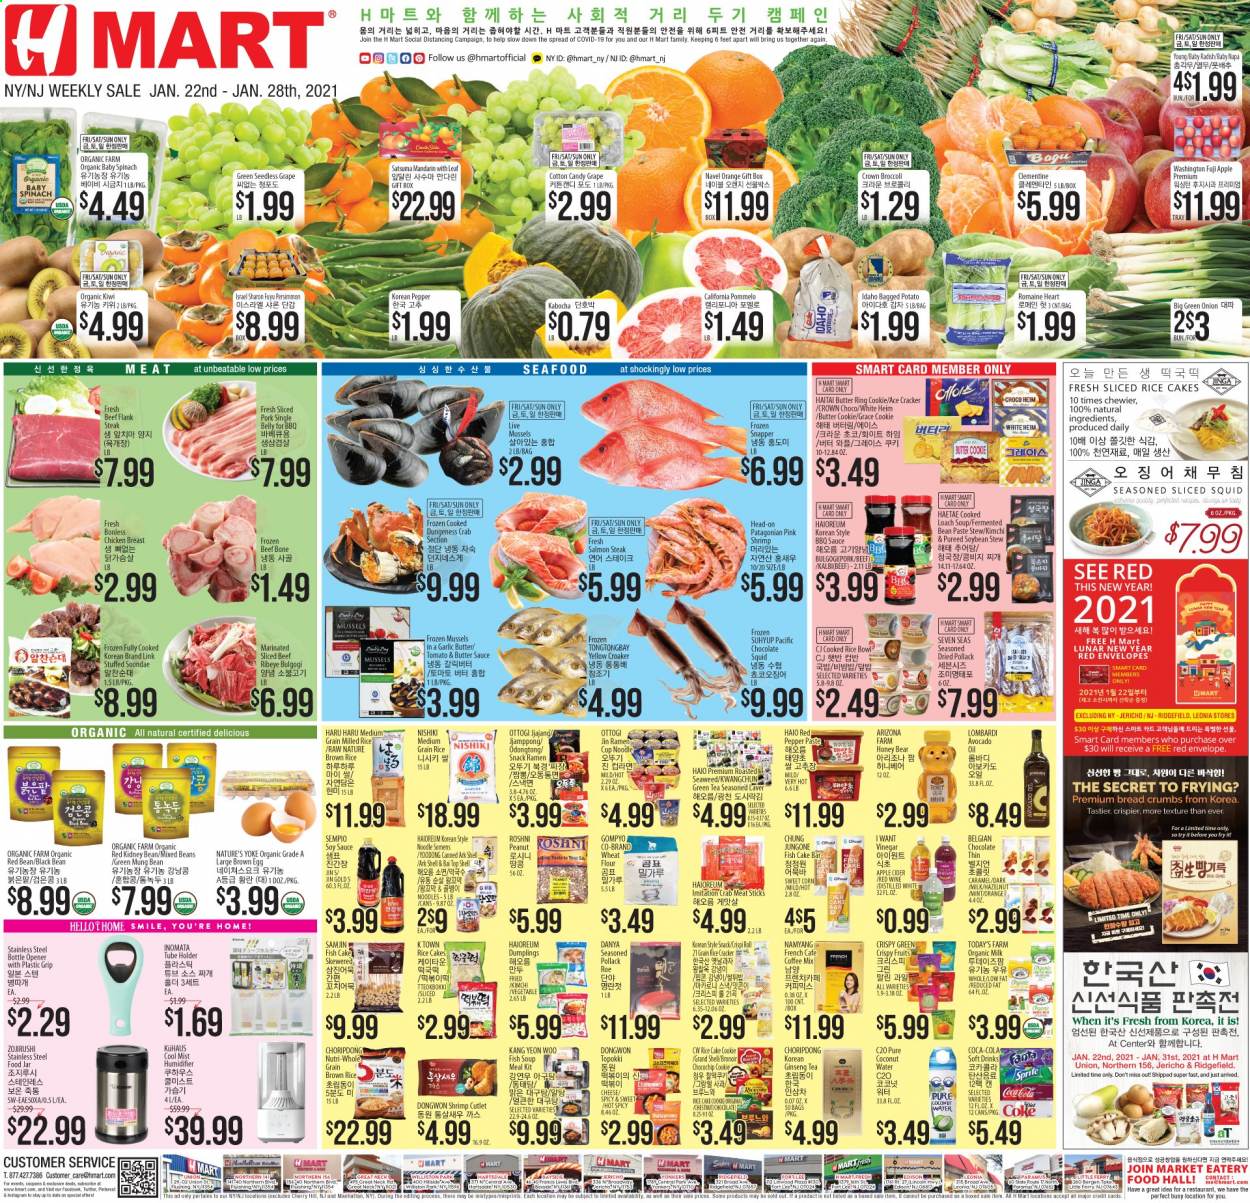 thumbnail - Hmart Flyer - 01/22/2021 - 01/28/2021 - Sales products - persimmons, Fuji apple, bread, cake, breadcrumbs, oranges, chayote, crab meat, mussels, salmon, squid, seafood, crab, fish, shrimps, ramen, soup, dumplings, cheese, organic milk, eggs, butter, beans, corn, spinach, sweet corn, fish cake, chocolate, cotton candy, crackers, snack, rice crackers, flour, wheat flour, seaweed, mandarines, whole grain rice, noodles, BBQ sauce, caramel, soy sauce, avocado oil, vinegar, honey, peanuts, Coca-Cola, coconut water, soft drink, AriZona, Bai, green tea, tea, apple cider, chicken breasts, beef meat, steak, flank steak, mug, steel bottle, bottle opener, cup, travel bottle, bowl, jar, ginseng, kiwi. Page 1.